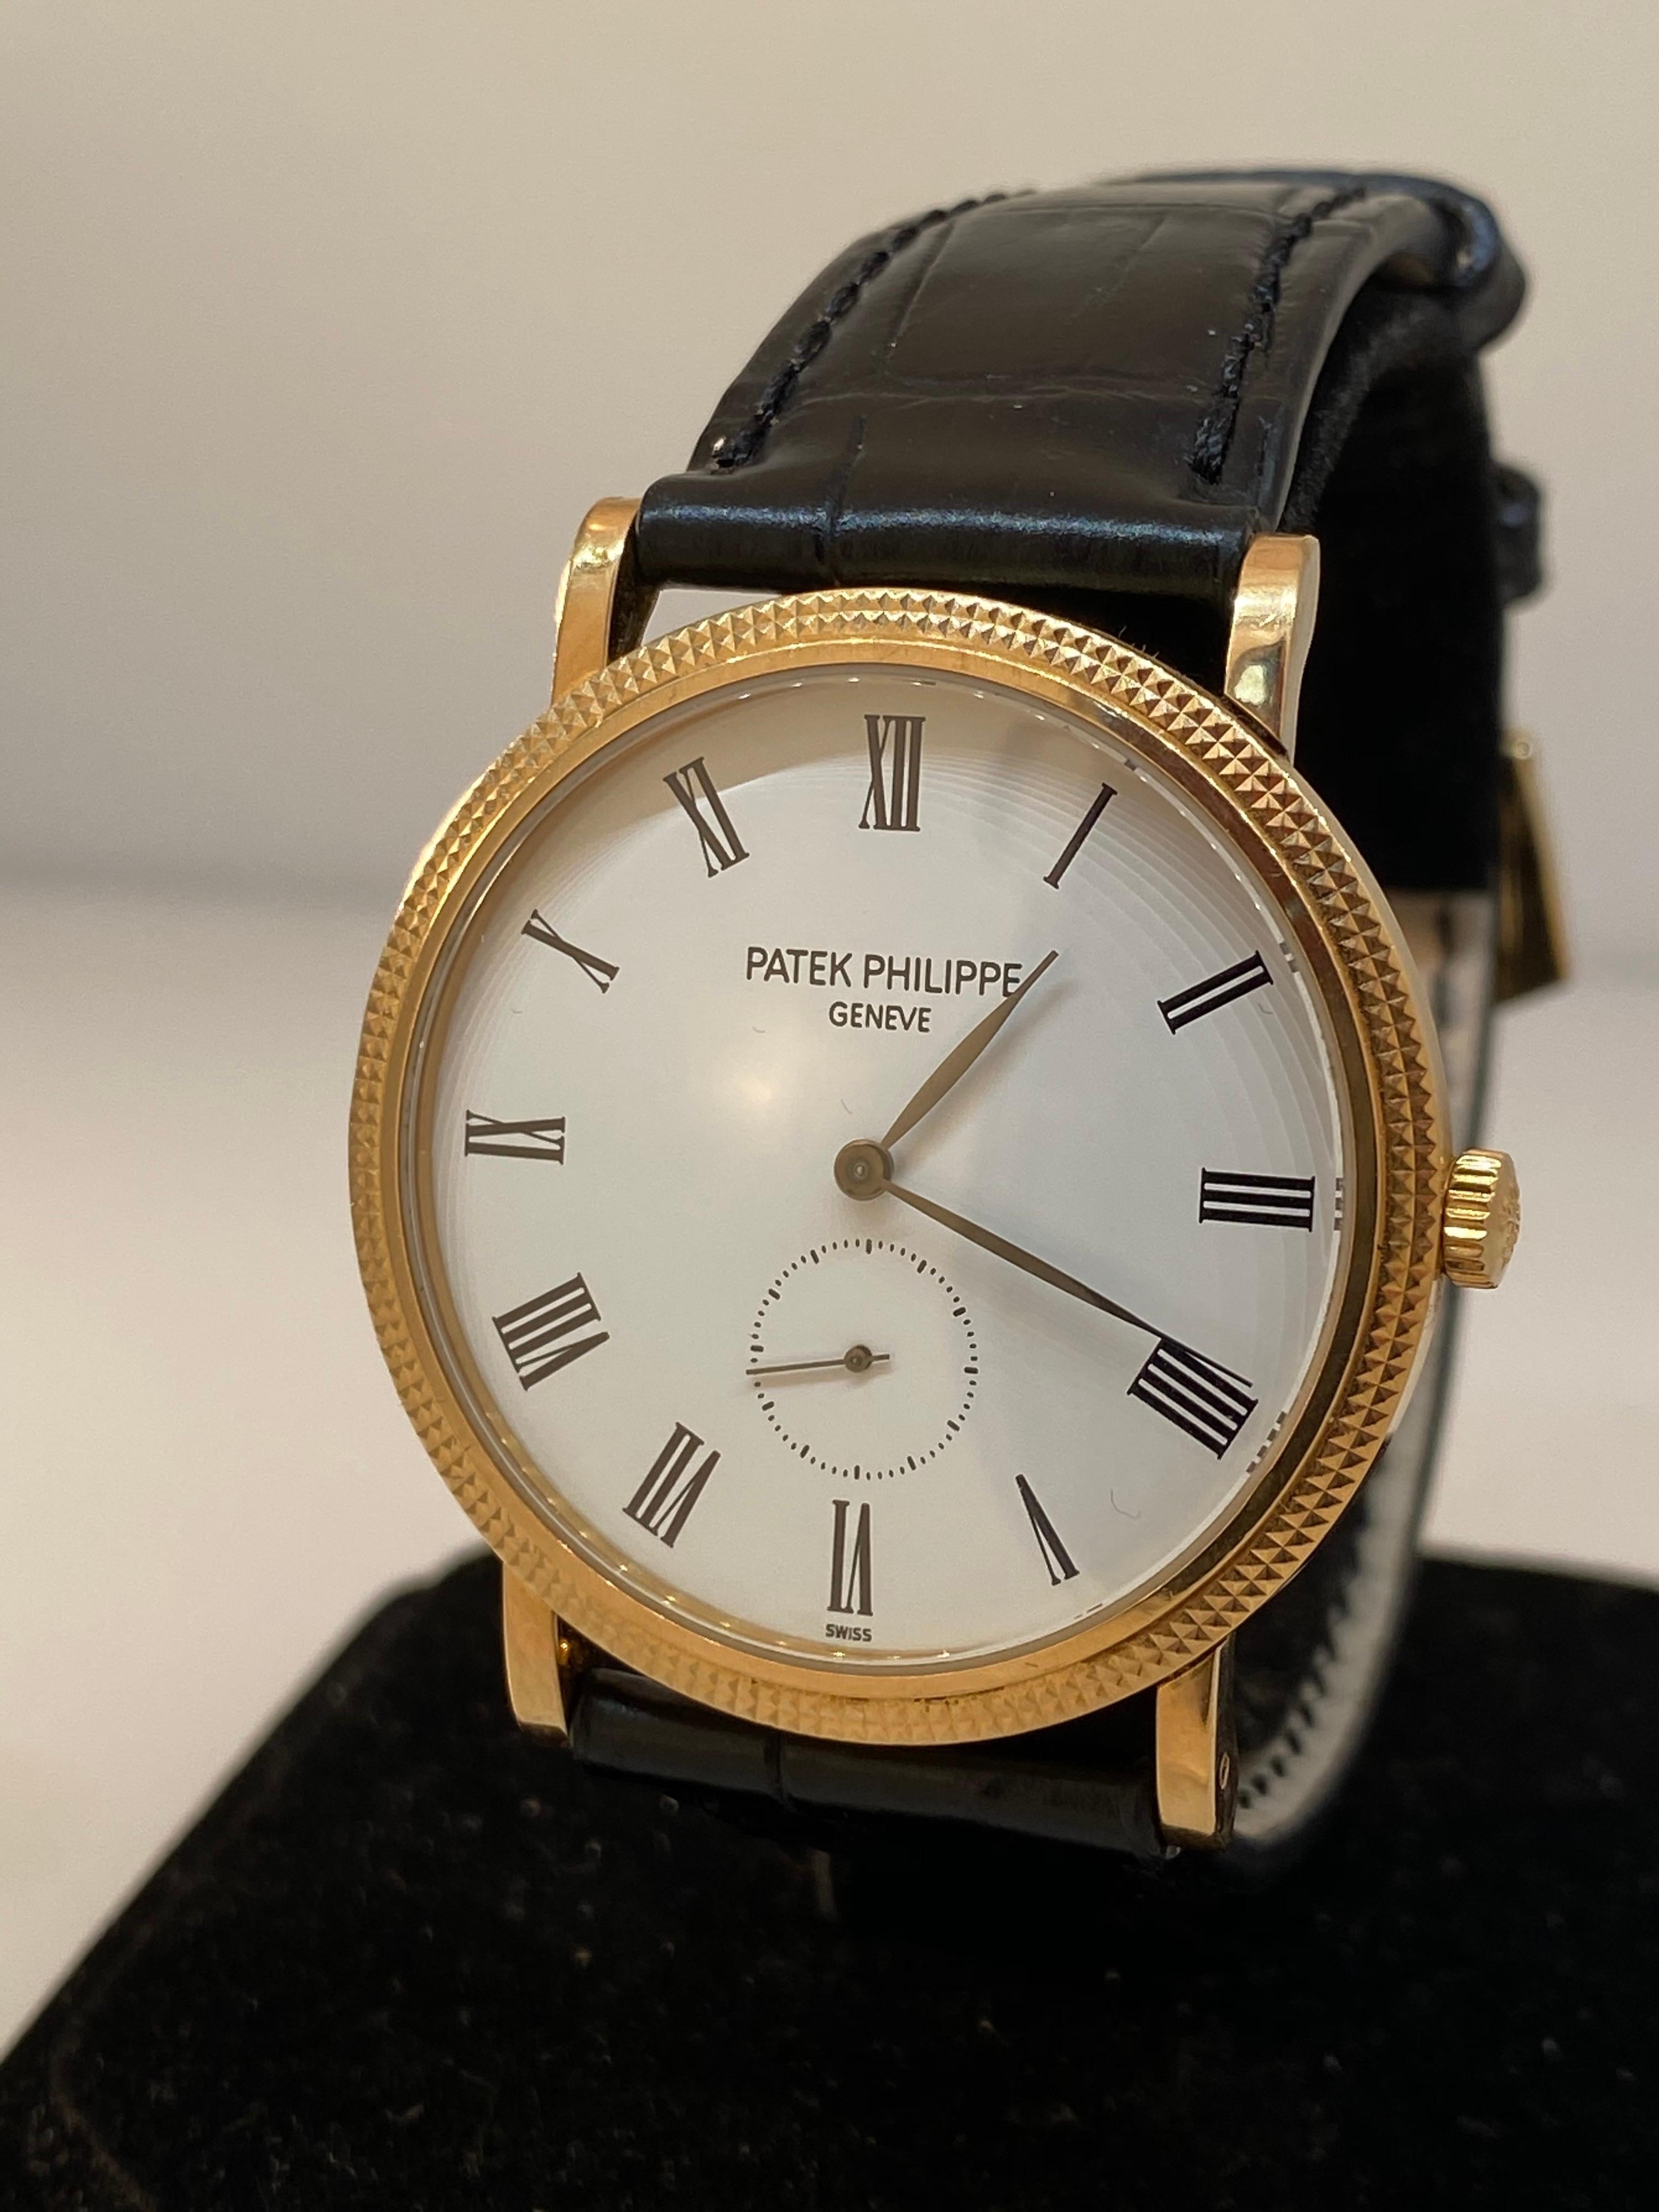 Patek Philippe Calatrava Rose Gold White Dial Leather Band Men's Watch 5119R In Excellent Condition For Sale In New York, NY